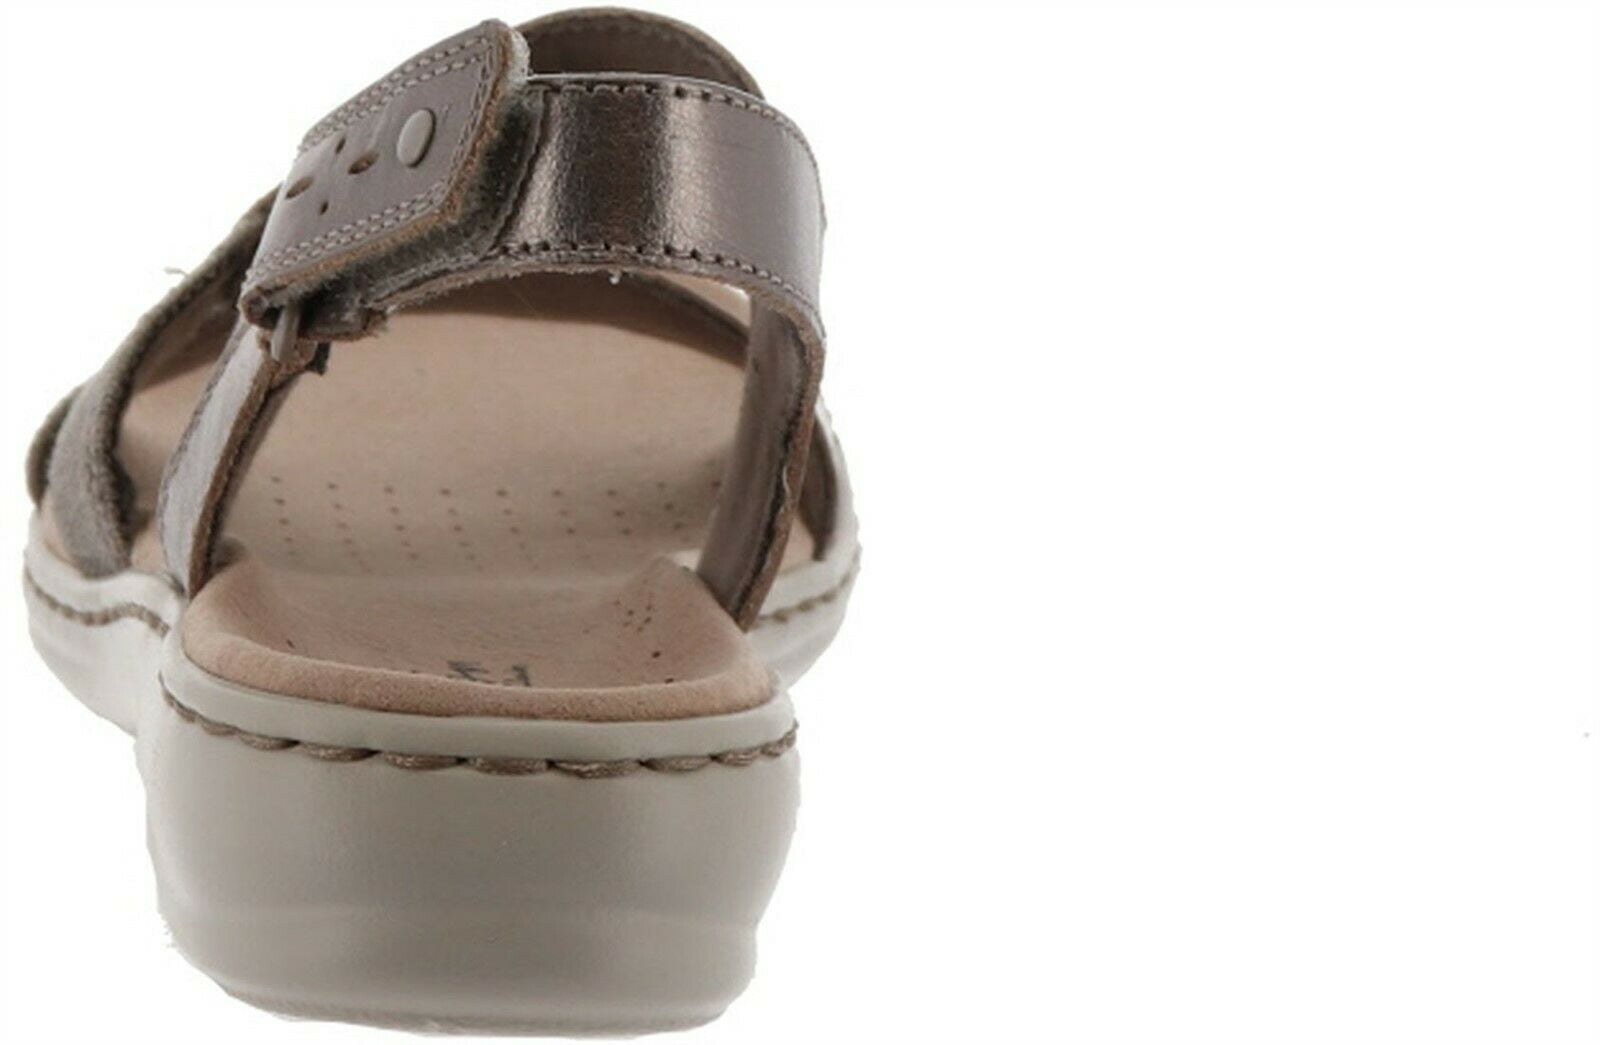 clarks sandals with backstrap